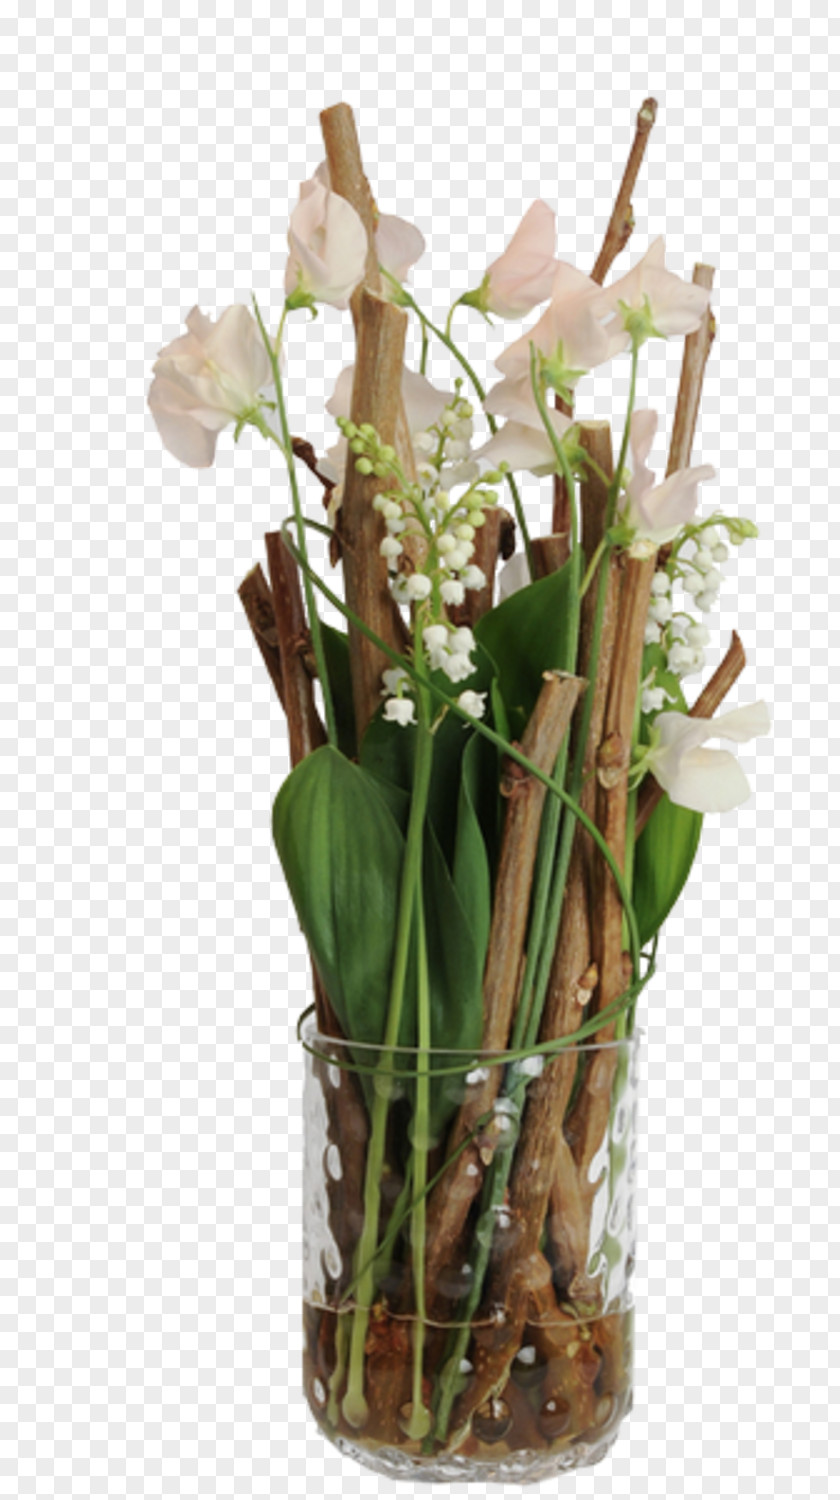 Lily Of The Valley Floral Design Cut Flowers Vase PNG